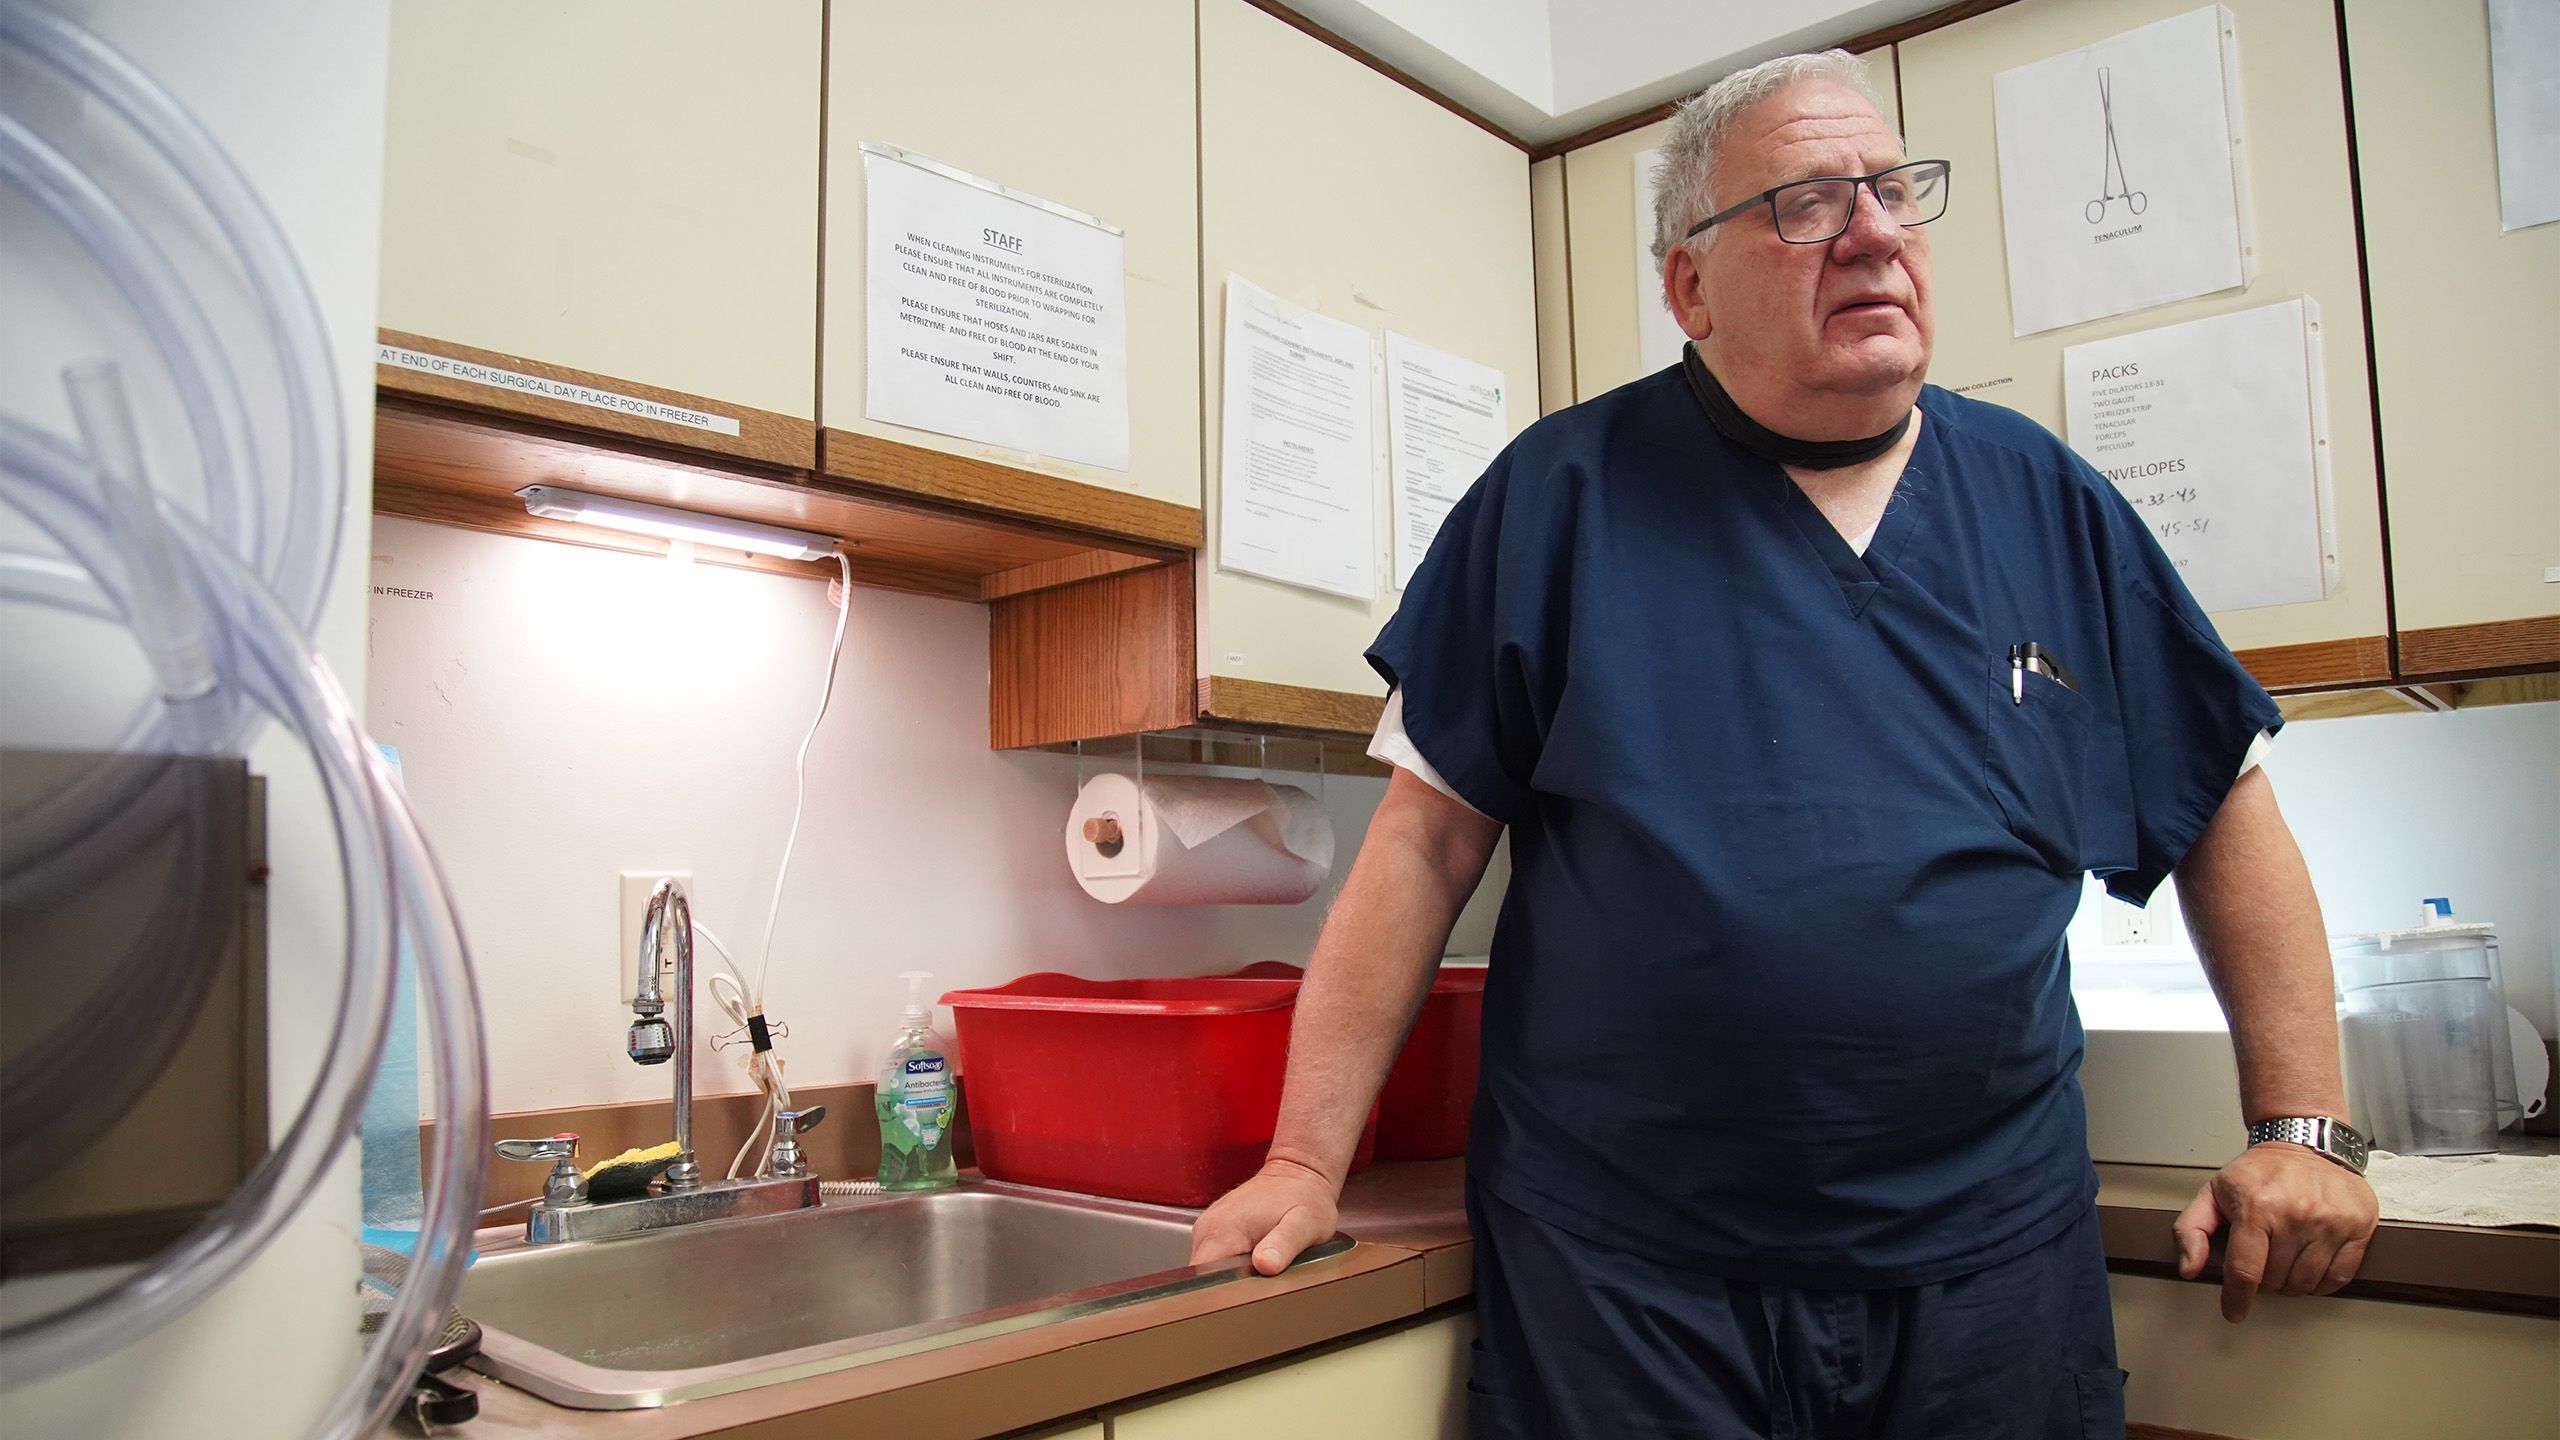 Dr. David Burkons leans against the counter at the Northeast Ohio Women’s Center in Cuyahoga Falls, Ohio.